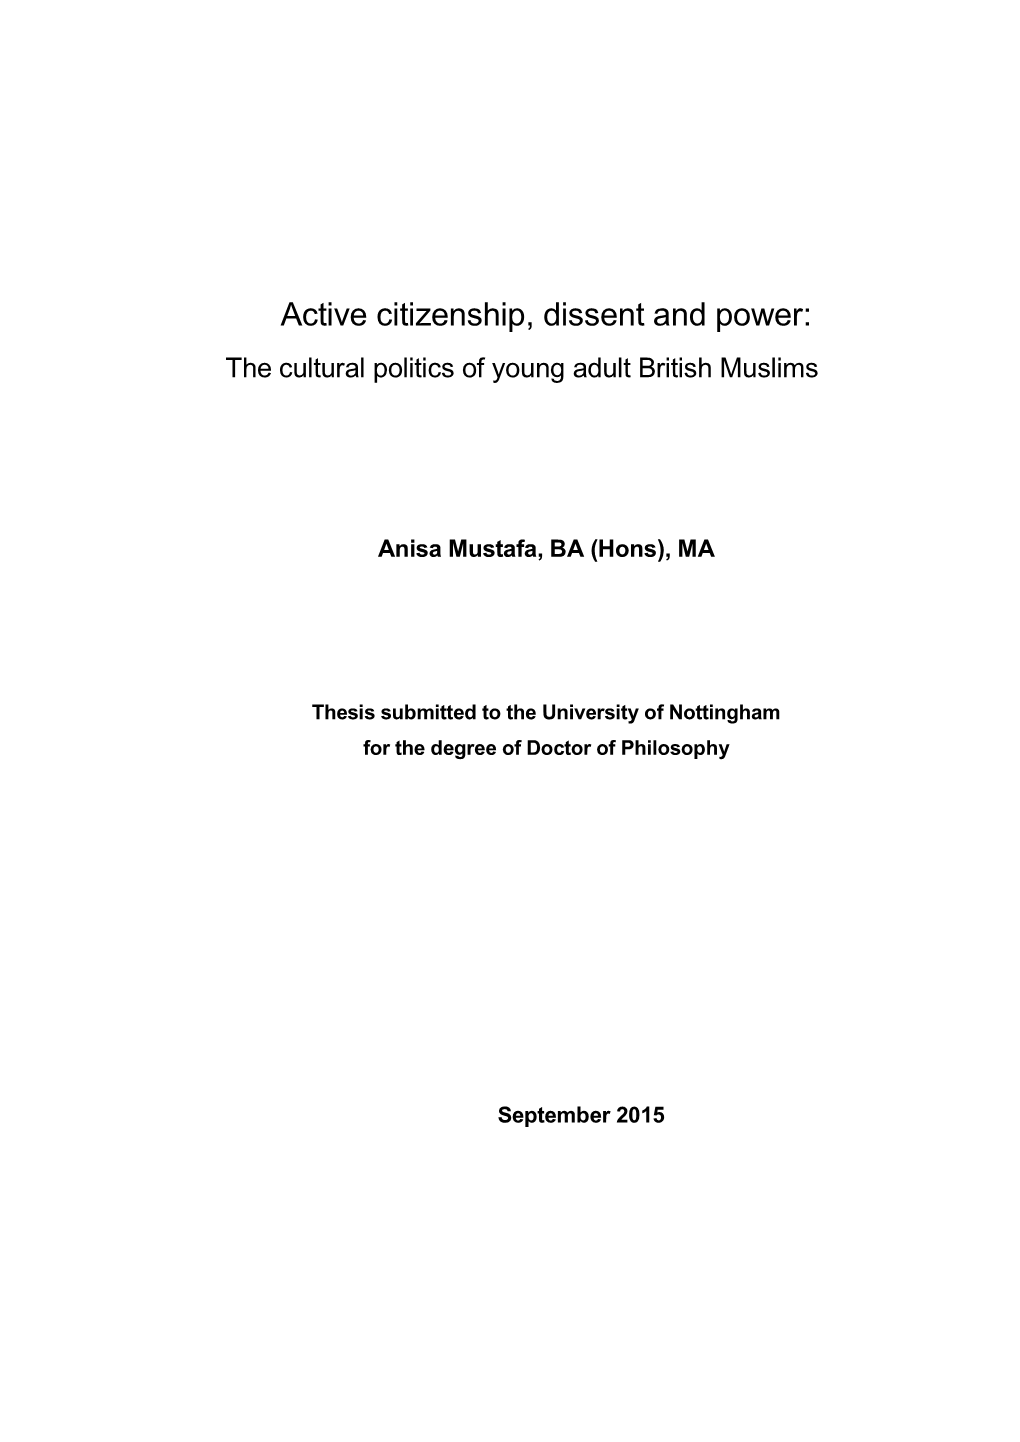 Active Citizenship, Dissent and Power: the Cultural Politics of Young Adult British Muslims